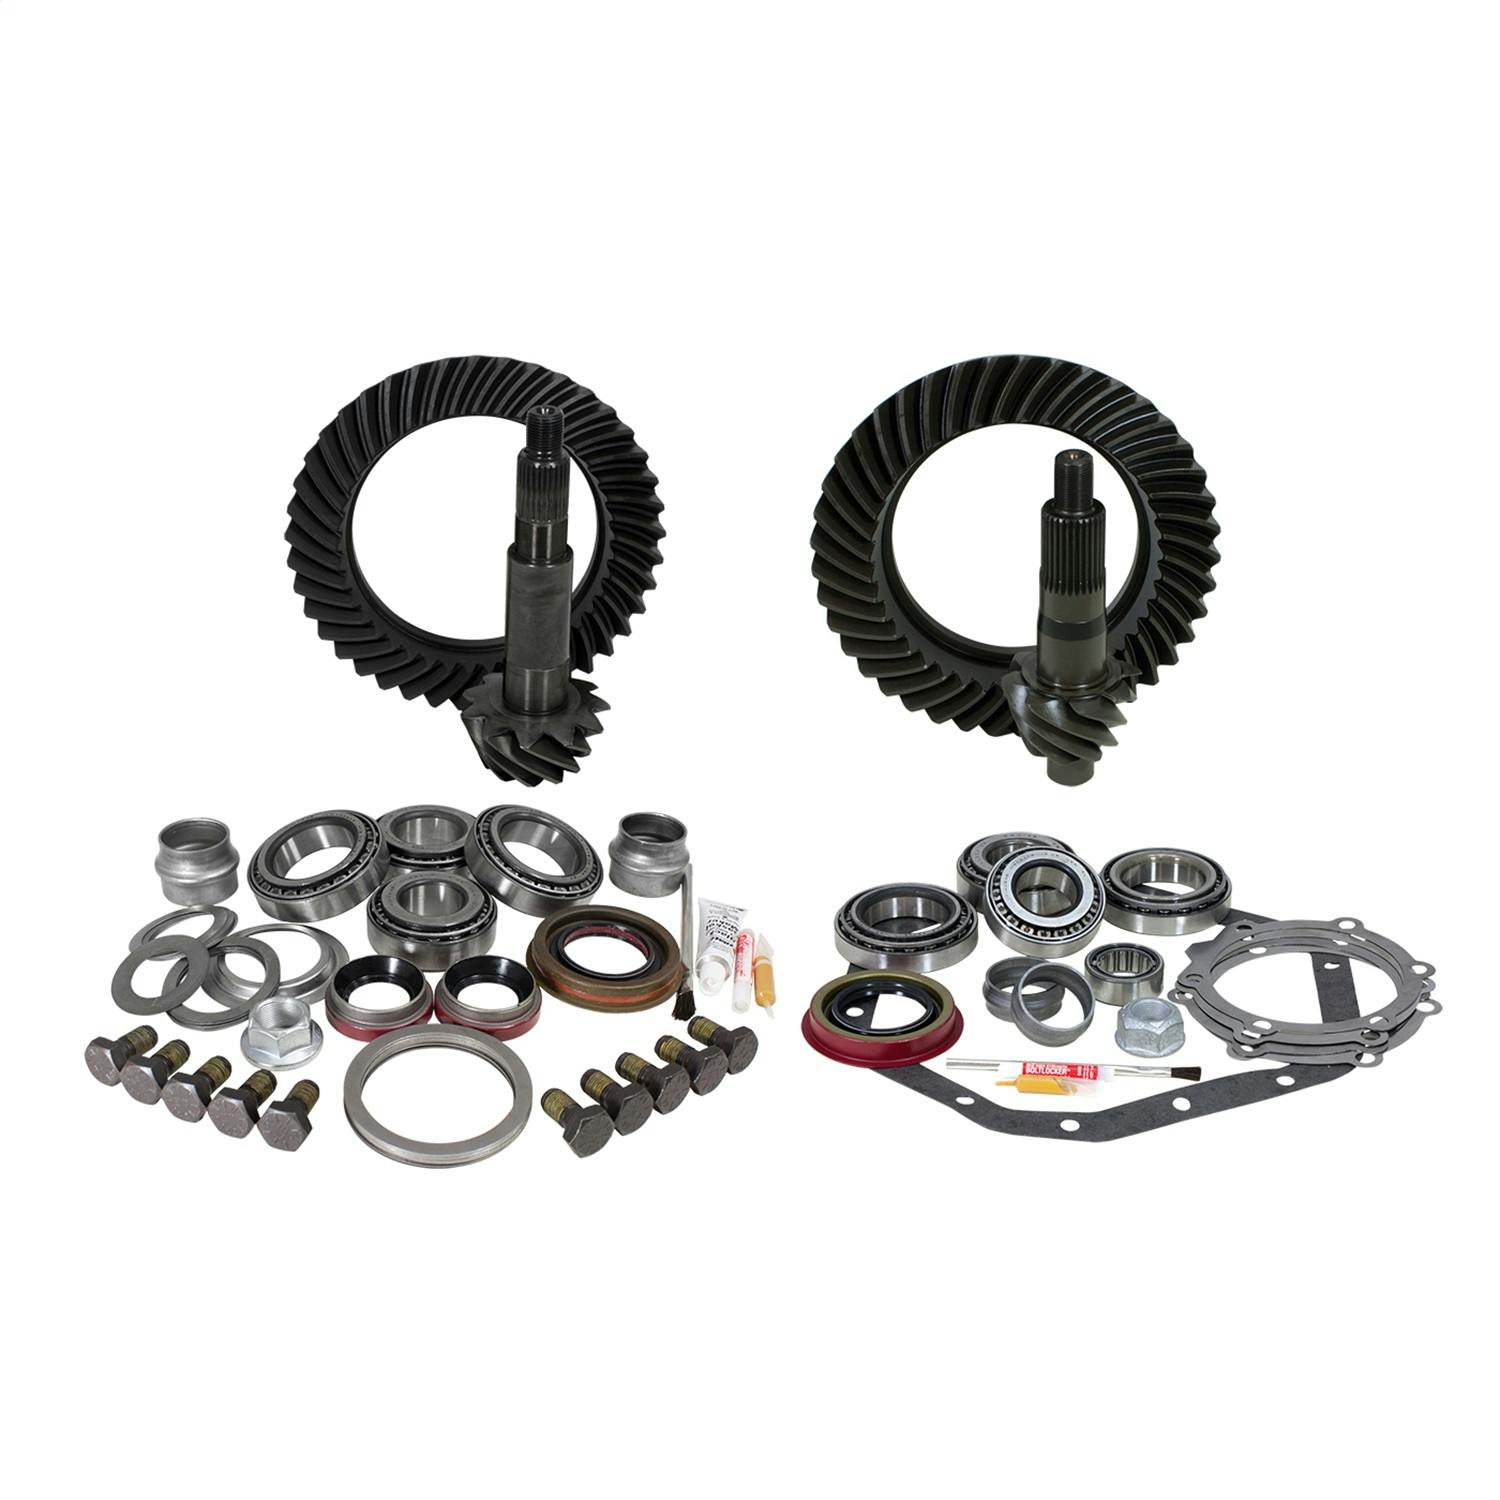 USA Standard Gear ZGK020 Ring And Pinion Set And Complete Install Kit